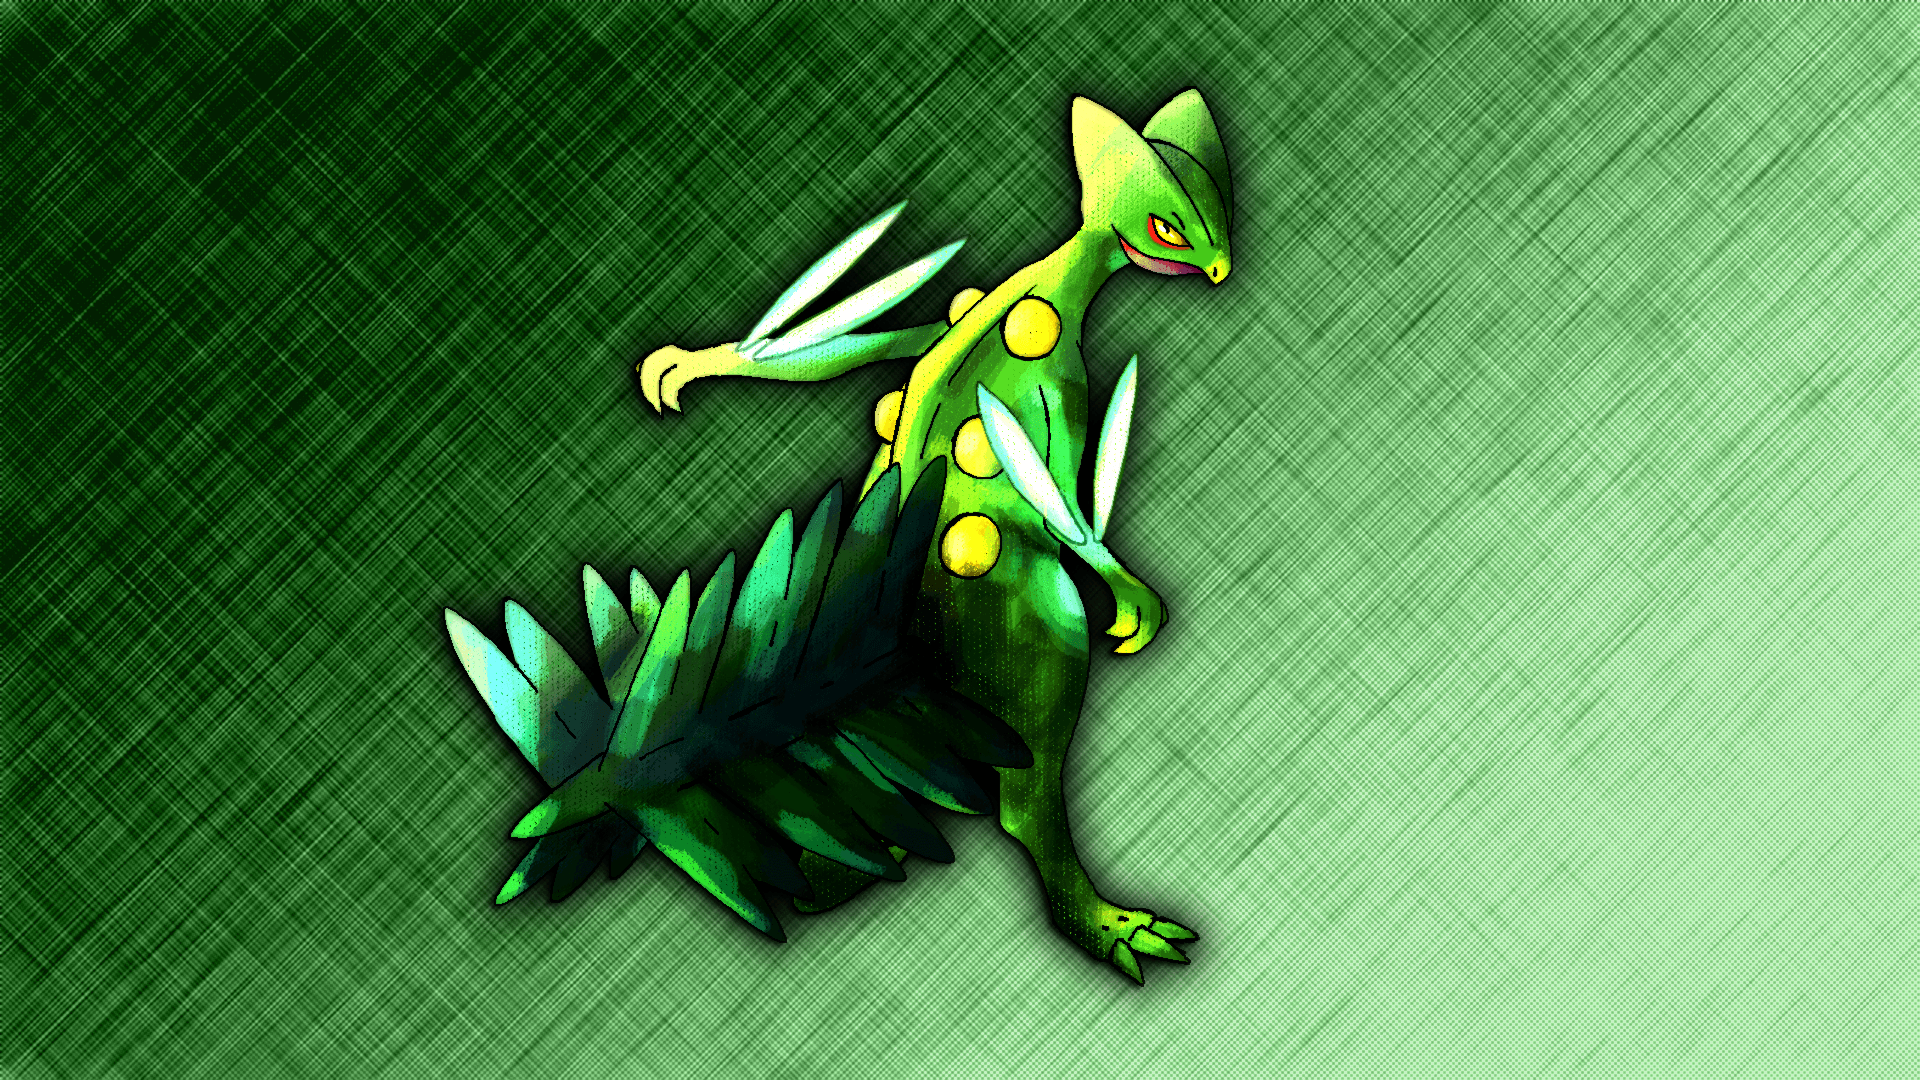 Sceptile Wallpapers by Glench